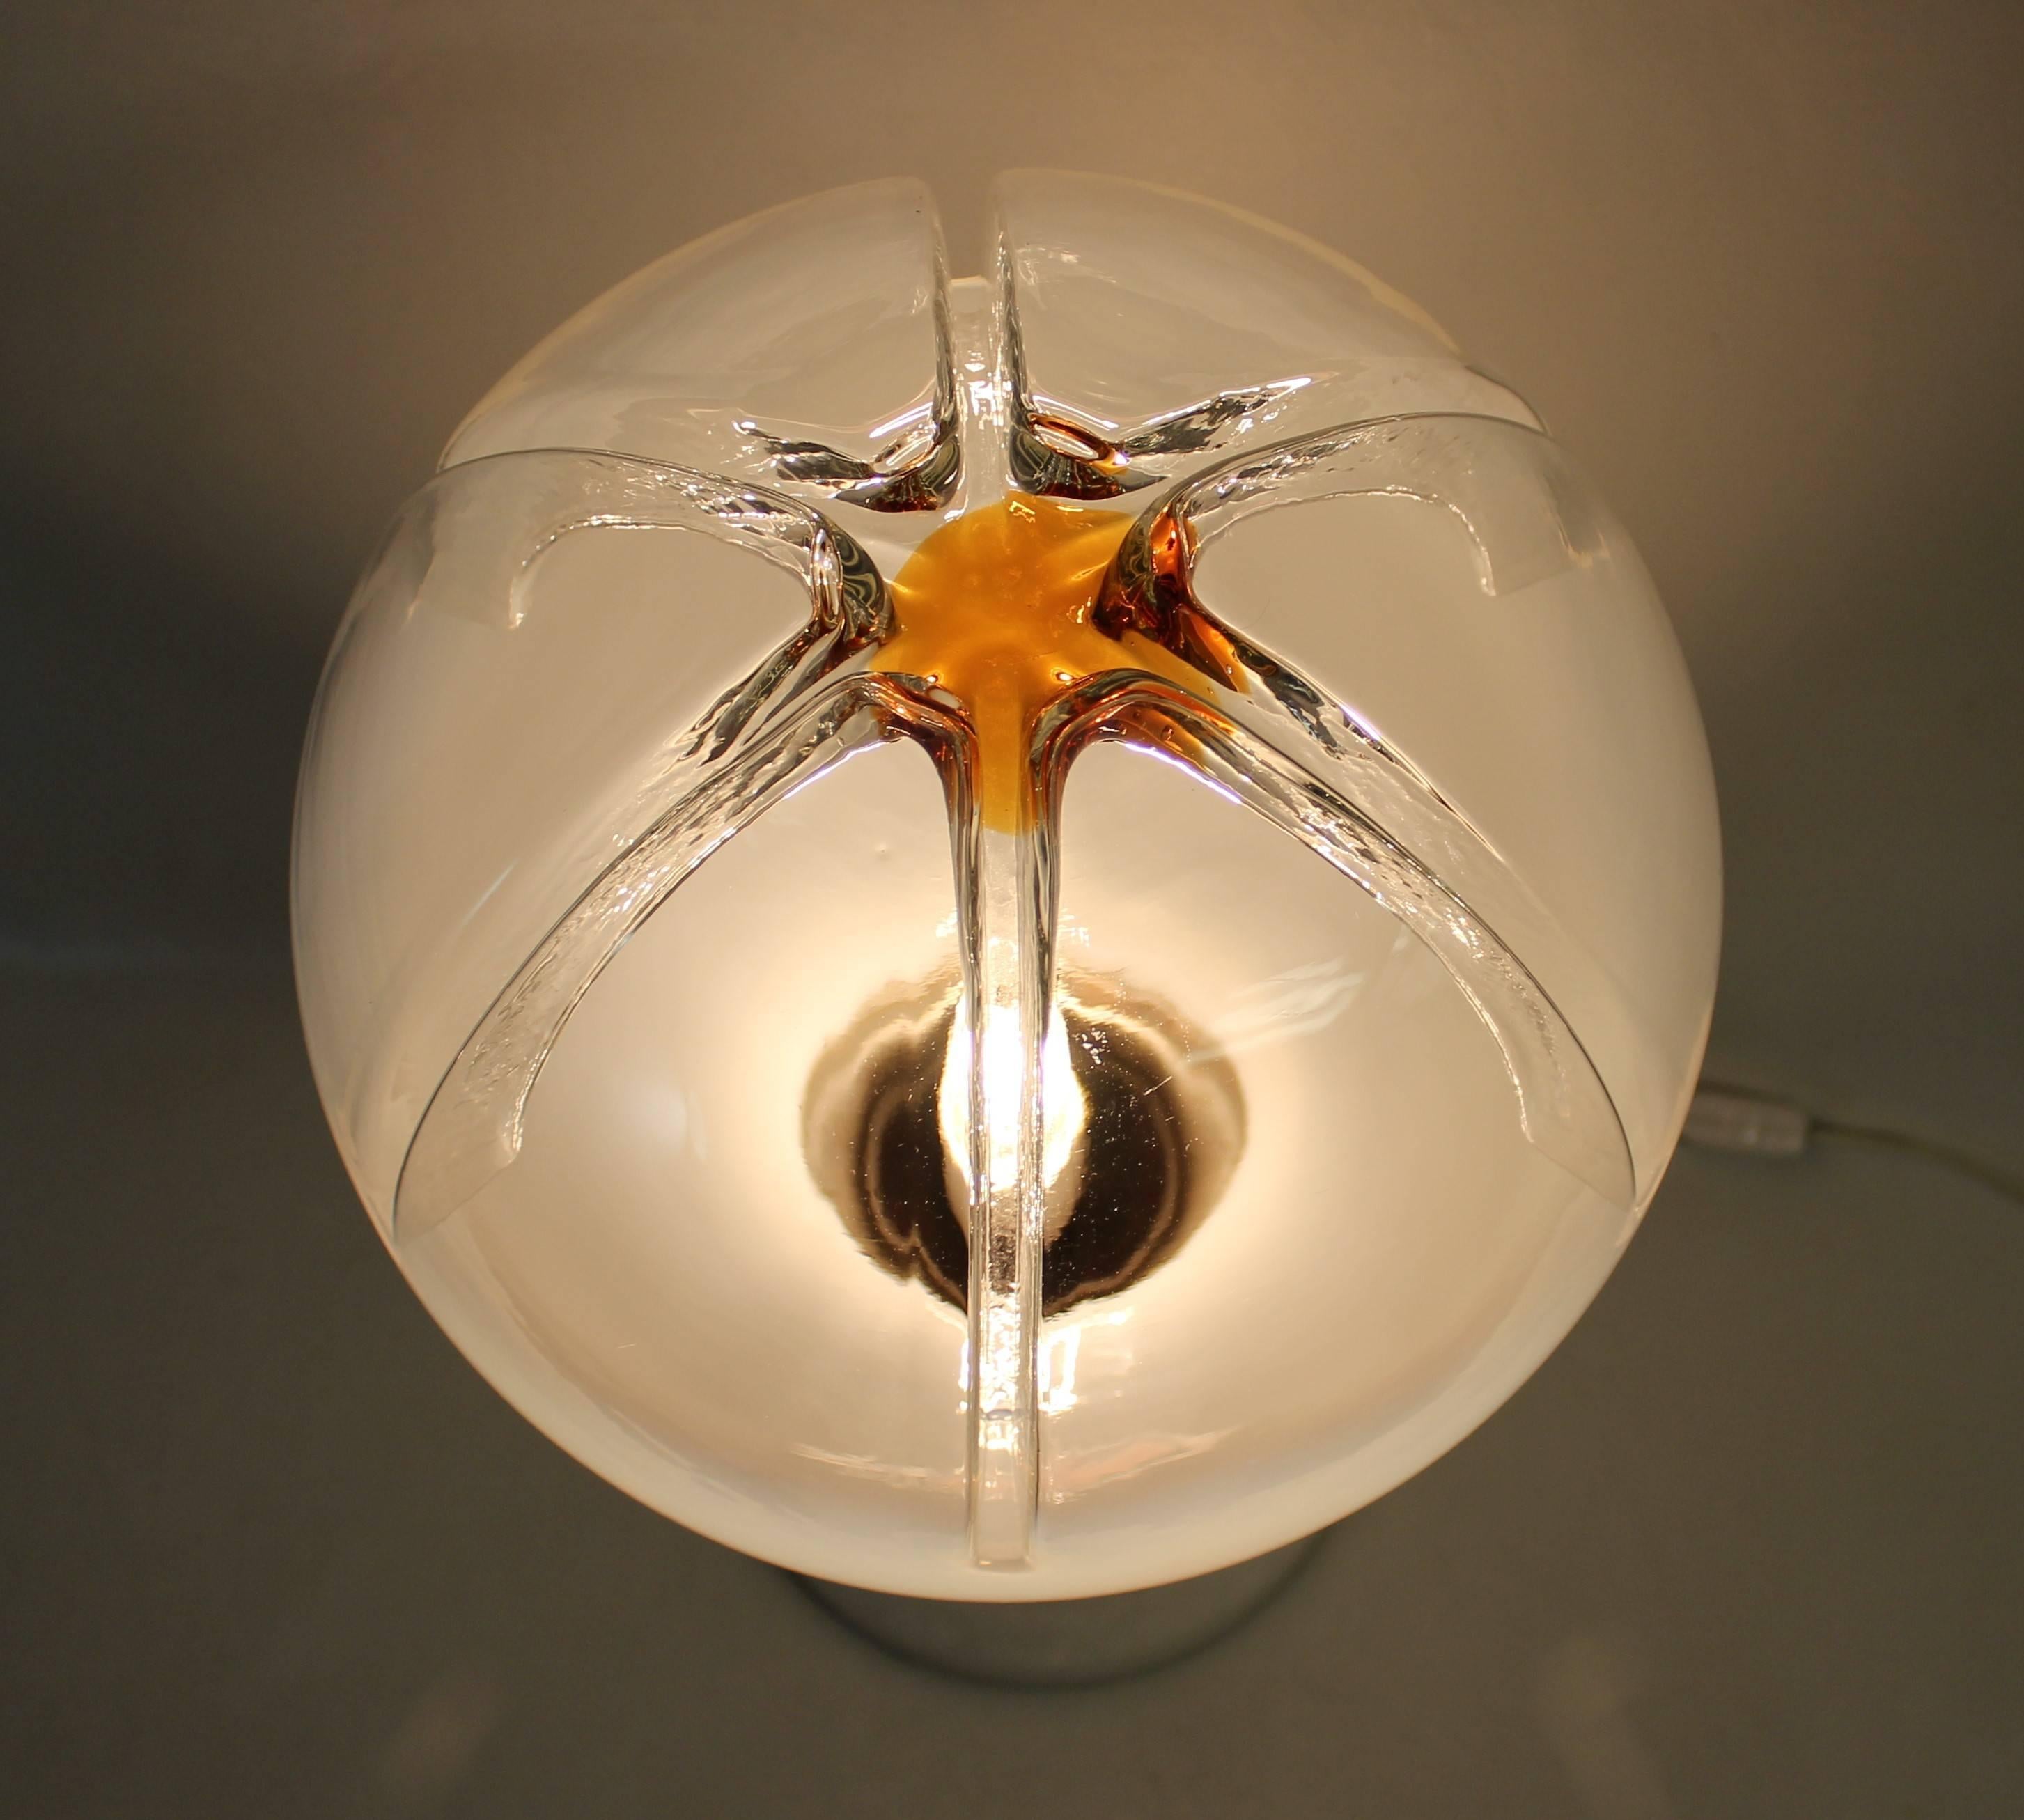 Mid-Century Modern Murano lamp featuring a milky glass and orange-tipped blown glass globe set in a chrome-plated structure with polished wood and marble base.